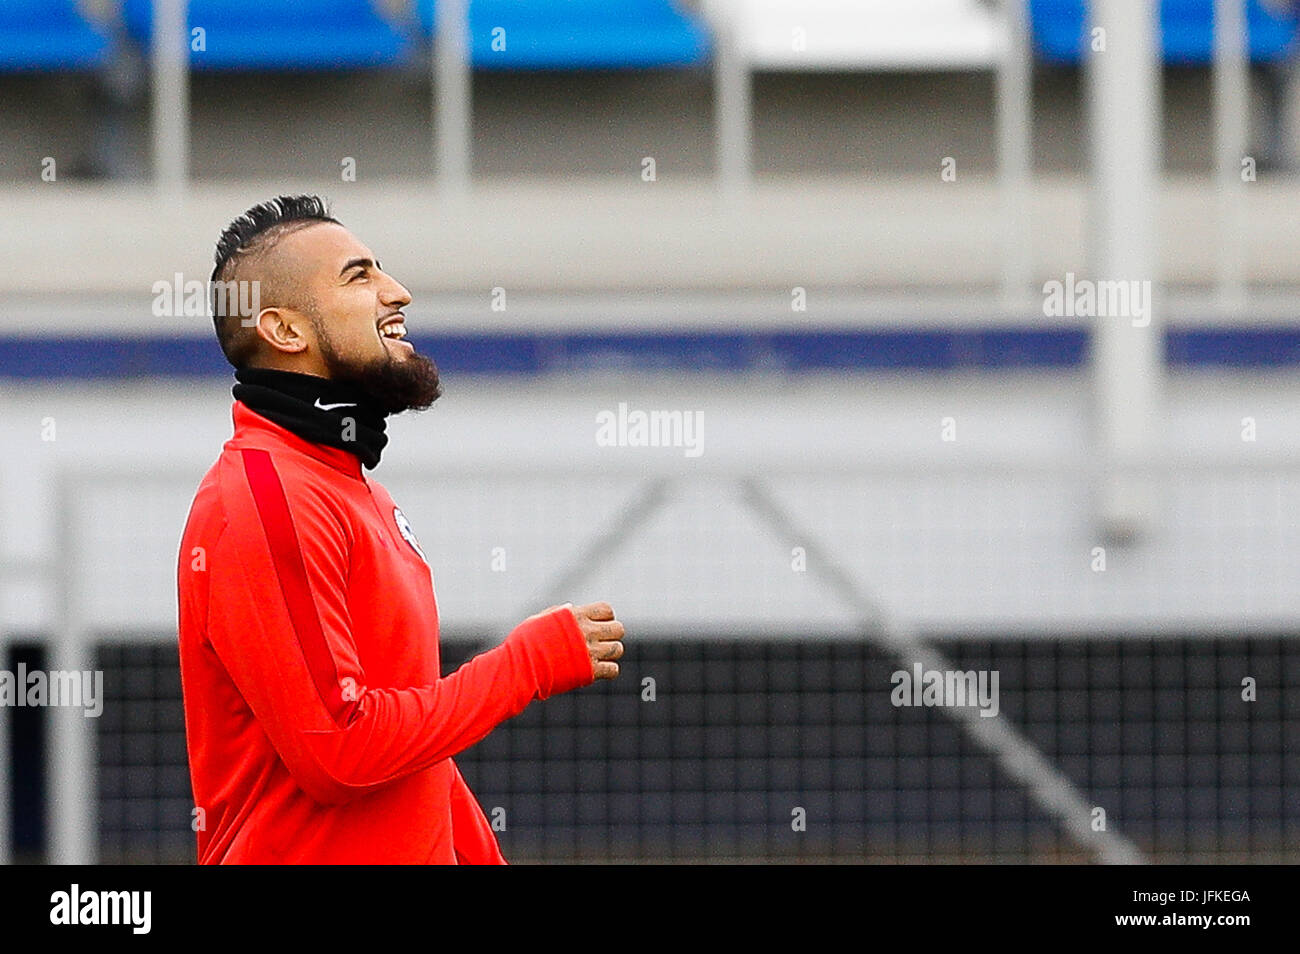 SÃO PETERSBURGO, MO - 01.07.2017: CHILE TRAINING IN ST. PETERSBURG - VIDAL Arturo of Chile during training of the Chilean team on the eve of the final of the 2017 Confederations Cup, between Chile and Germany held at the Smena Stadium in St. Petersburg, Russia. (Photo: Marcelo Machado de Melo/Fotoarena) Stock Photo